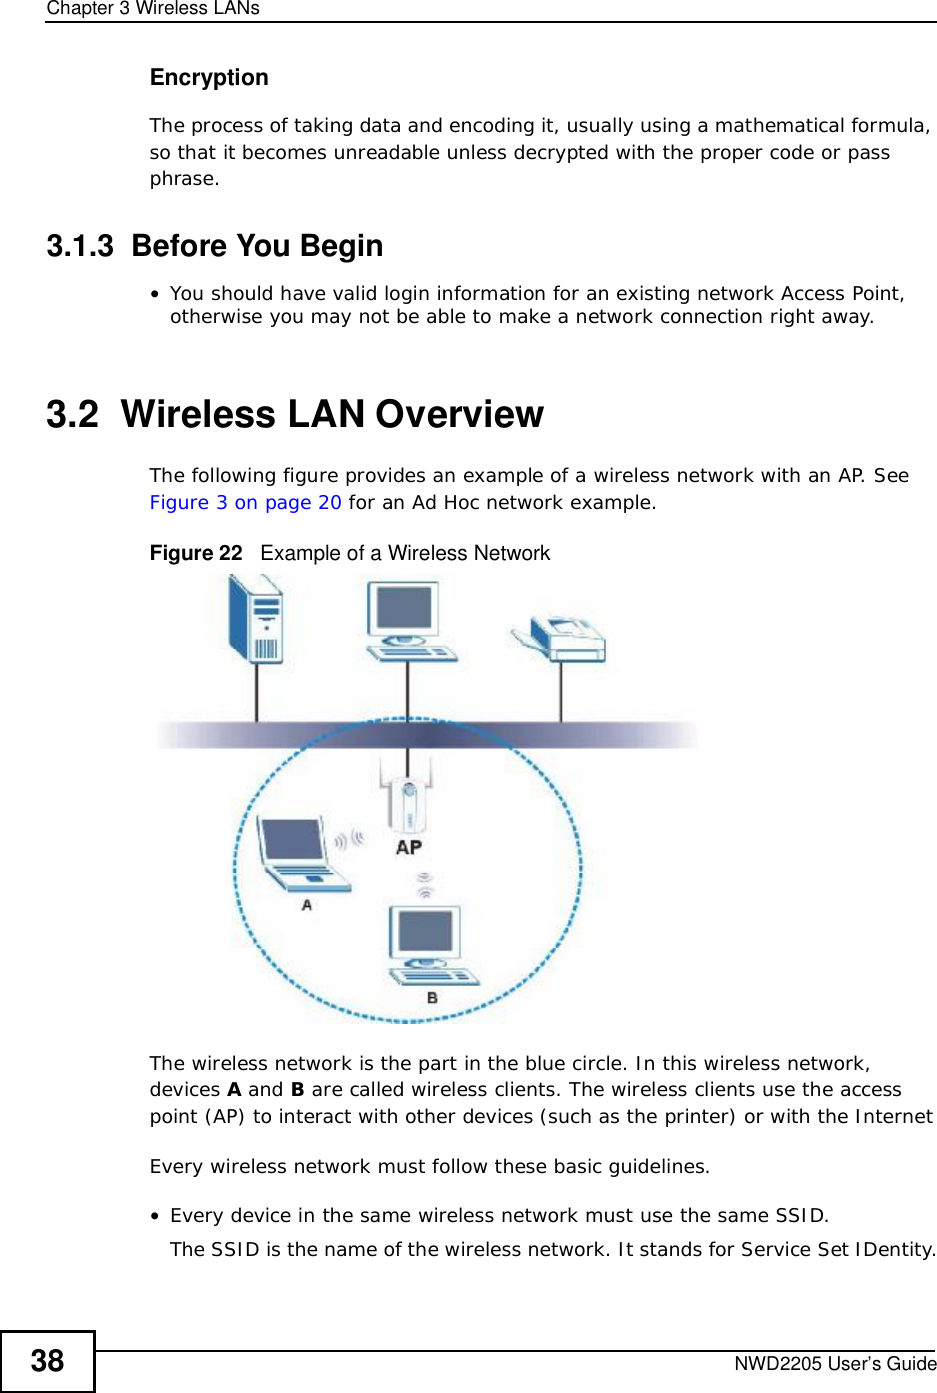 Chapter 3Wireless LANsNWD2205 User’s Guide38EncryptionThe process of taking data and encoding it, usually using a mathematical formula, so that it becomes unreadable unless decrypted with the proper code or pass phrase.3.1.3  Before You Begin•You should have valid login information for an existing network Access Point, otherwise you may not be able to make a network connection right away.3.2  Wireless LAN Overview The following figure provides an example of a wireless network with an AP. SeeFigure 3 on page 20 for an Ad Hoc network example.Figure 22   Example of a Wireless NetworkThe wireless network is the part in the blue circle. In this wireless network, devices A and B are called wireless clients. The wireless clients use the access point (AP) to interact with other devices (such as the printer) or with the InternetEvery wireless network must follow these basic guidelines.•Every device in the same wireless network must use the same SSID.The SSID is the name of the wireless network. It stands for Service Set IDentity.